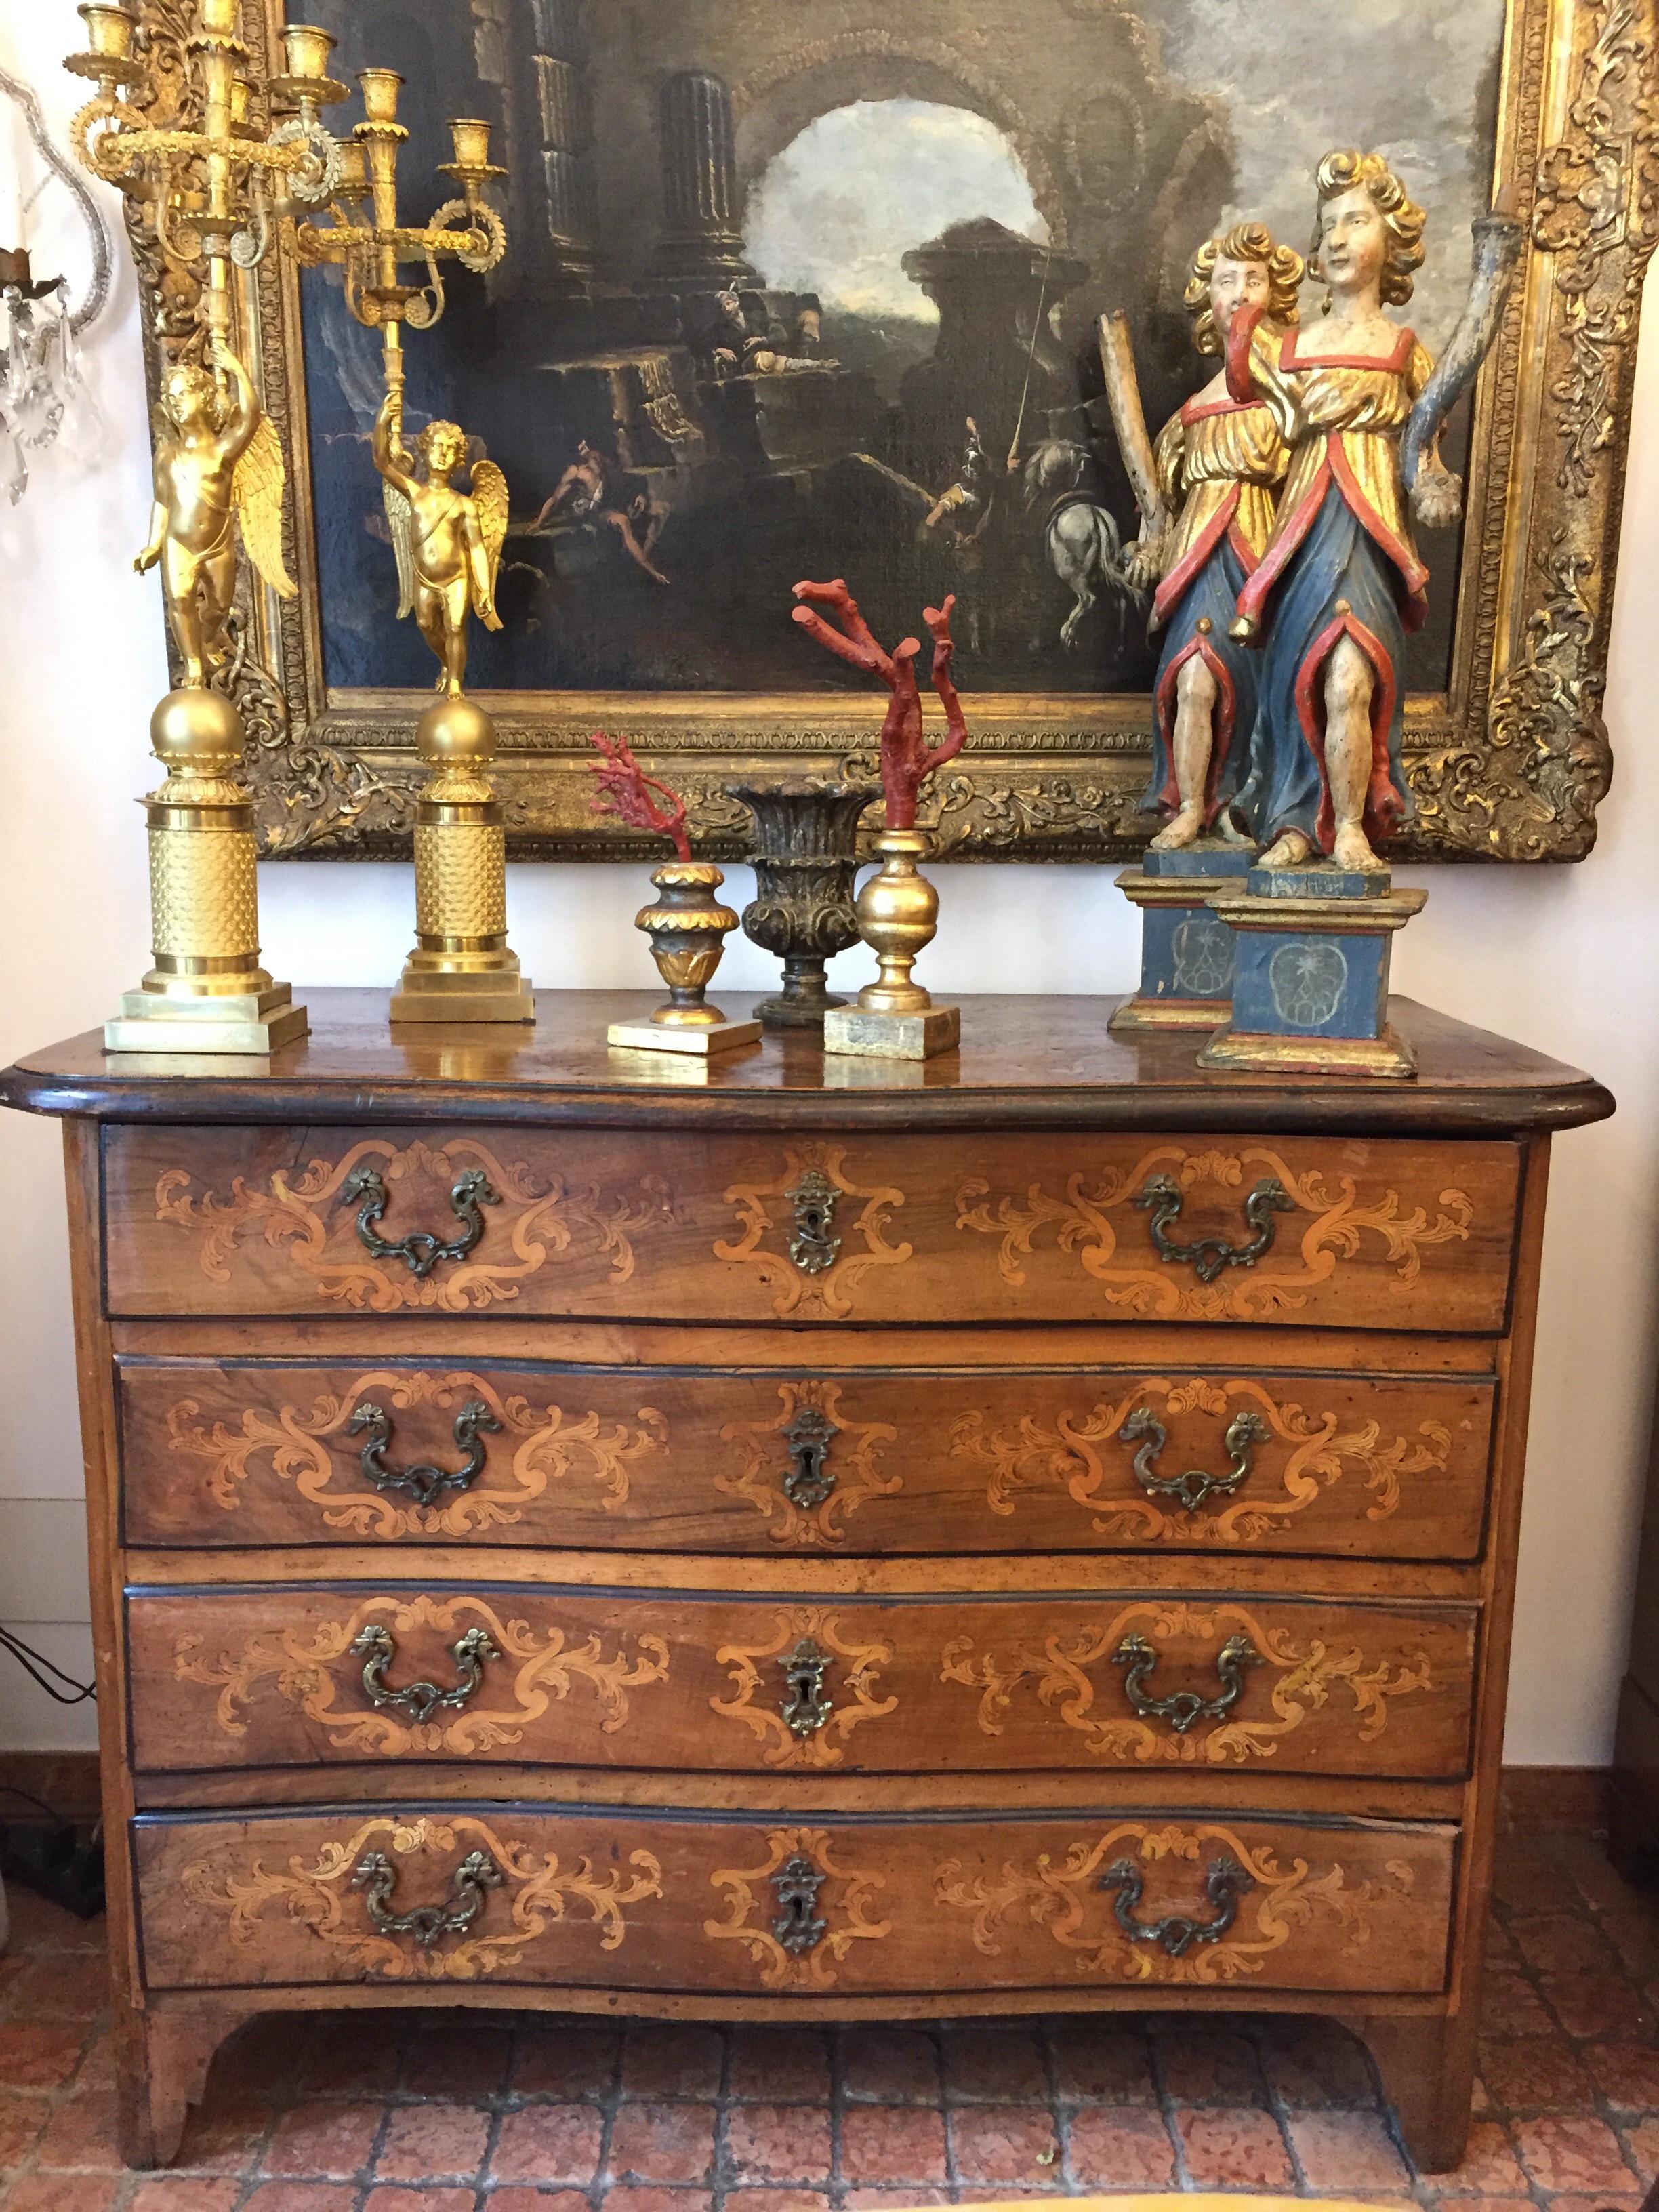 An Italian antique walnut chest of drawers from Piedmonte, dating back to the late 18th century. Four deep drawers, serpentine shaped front, top, sides and front are fully decorated by floral and vegetal pattern inlays. 
Great patina, bronze